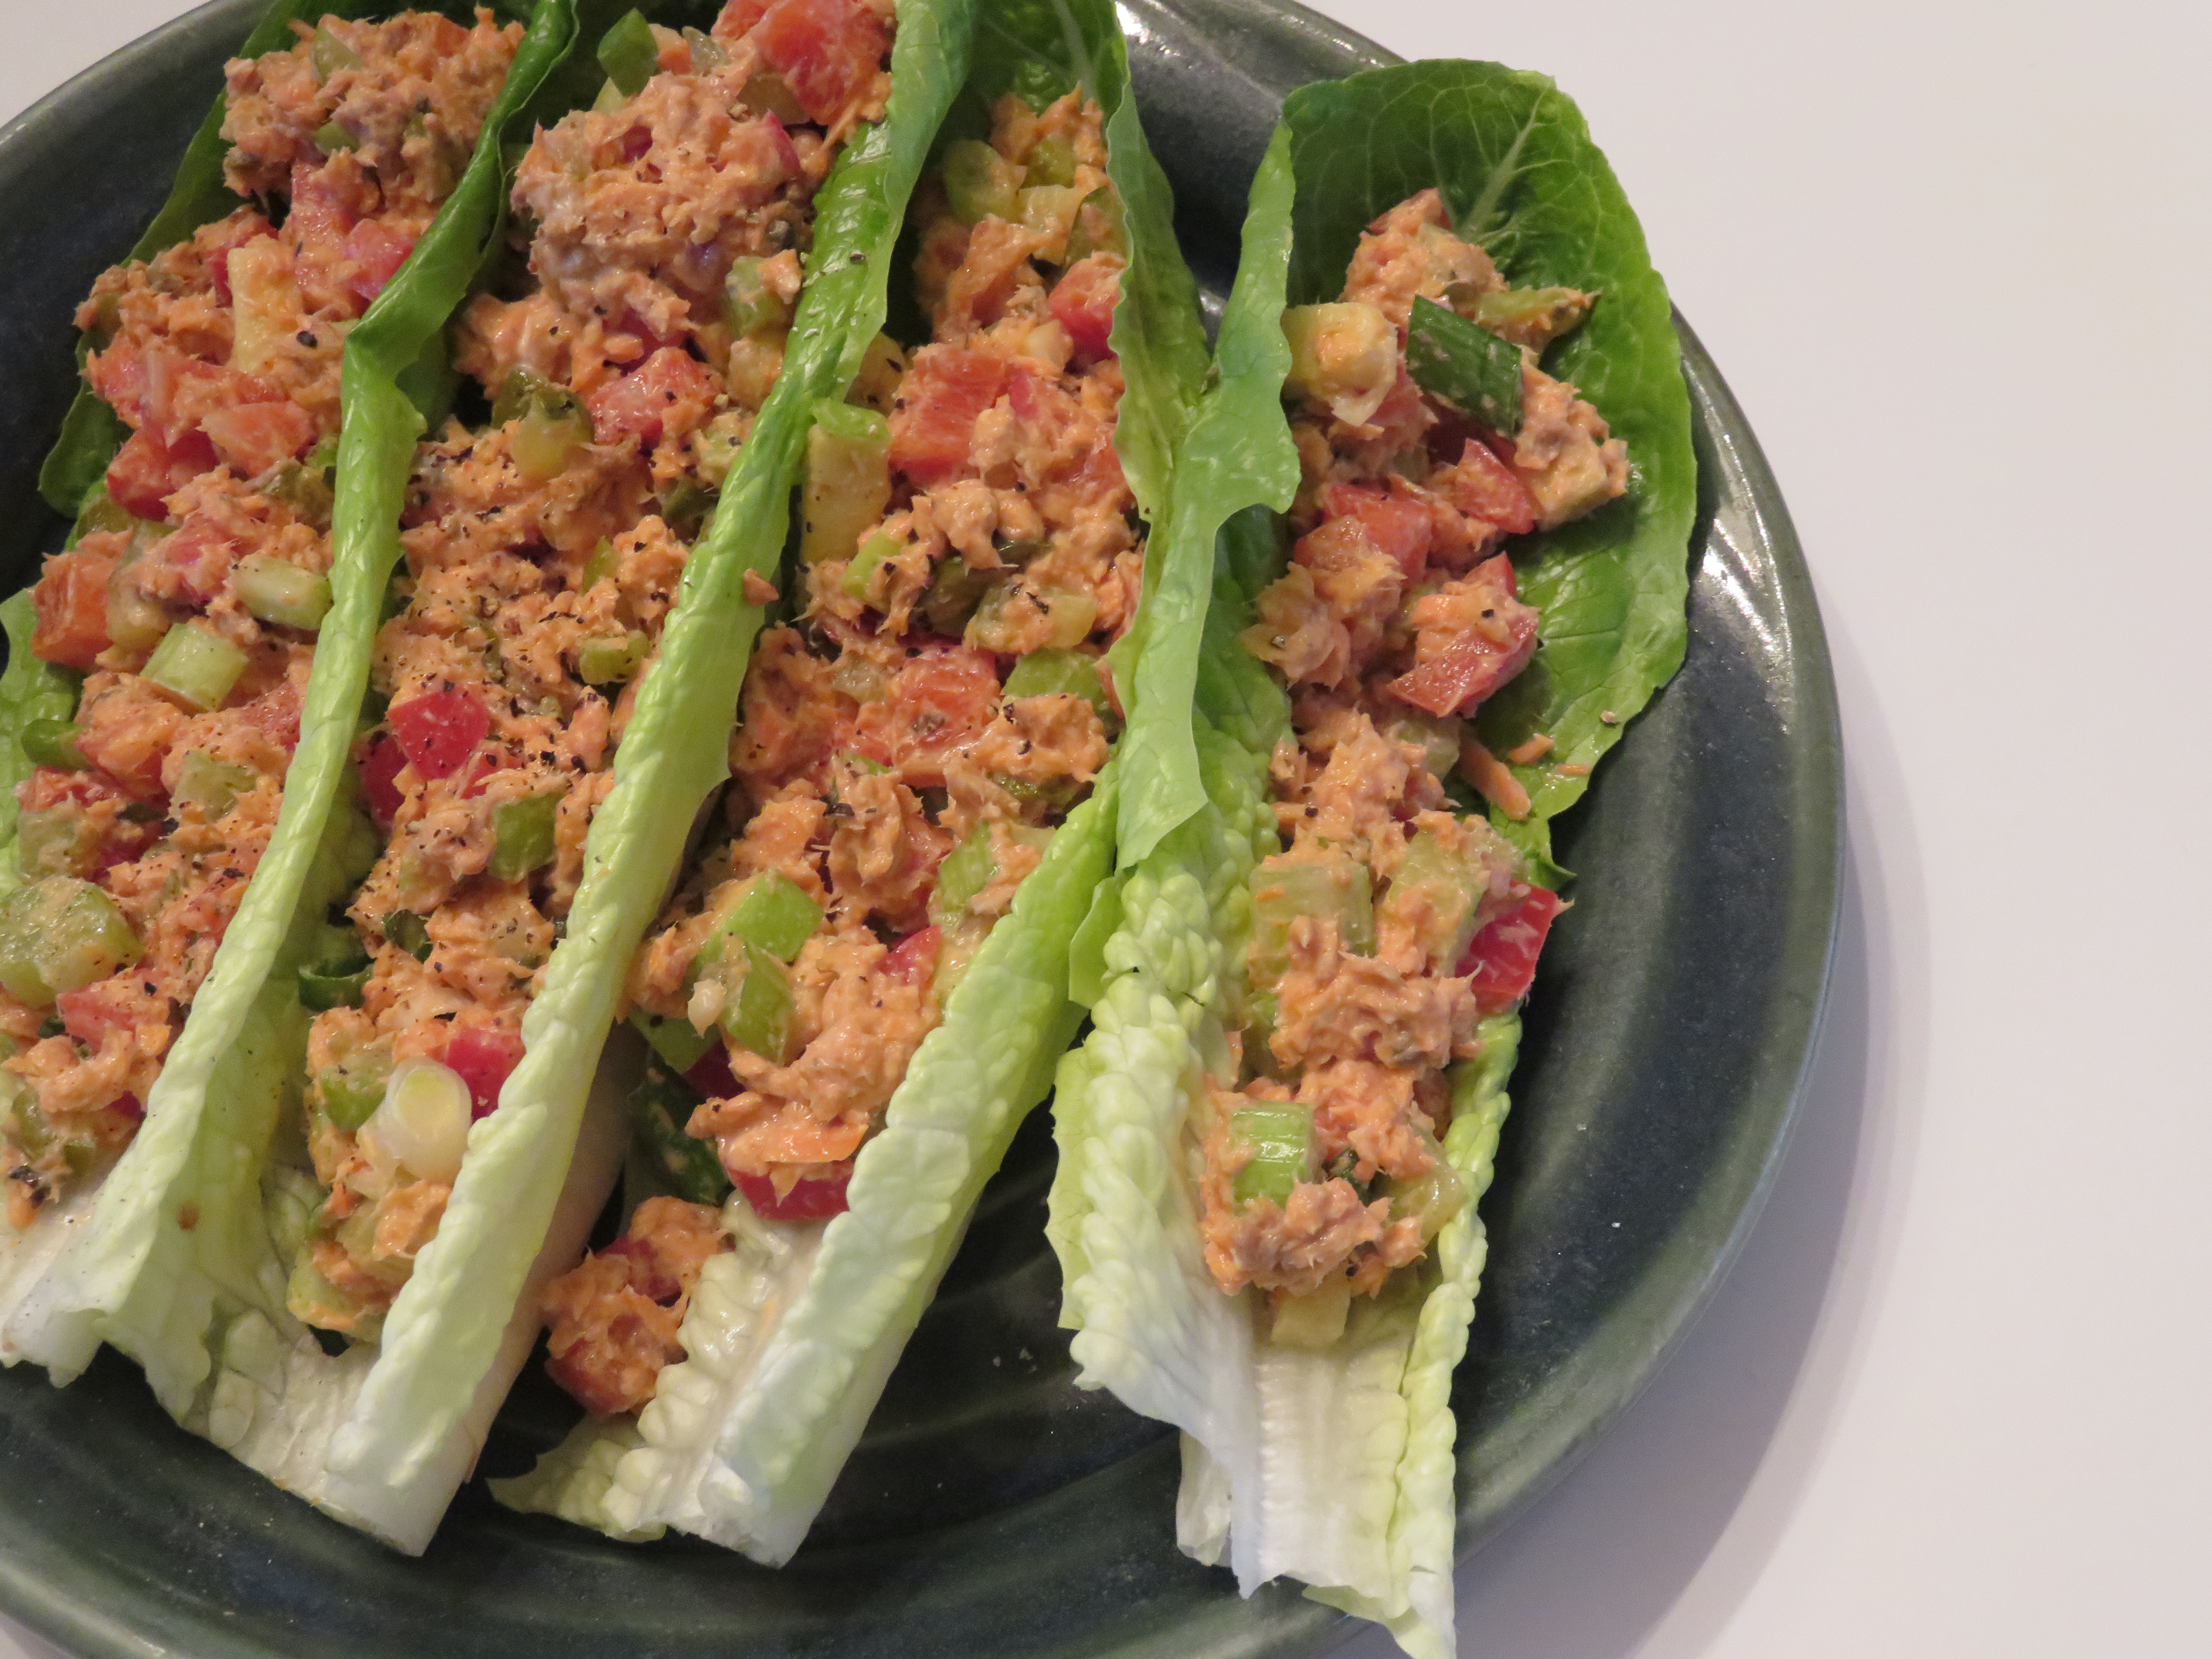 Salmon Salad on lettuce boats - Be Naturally Fit